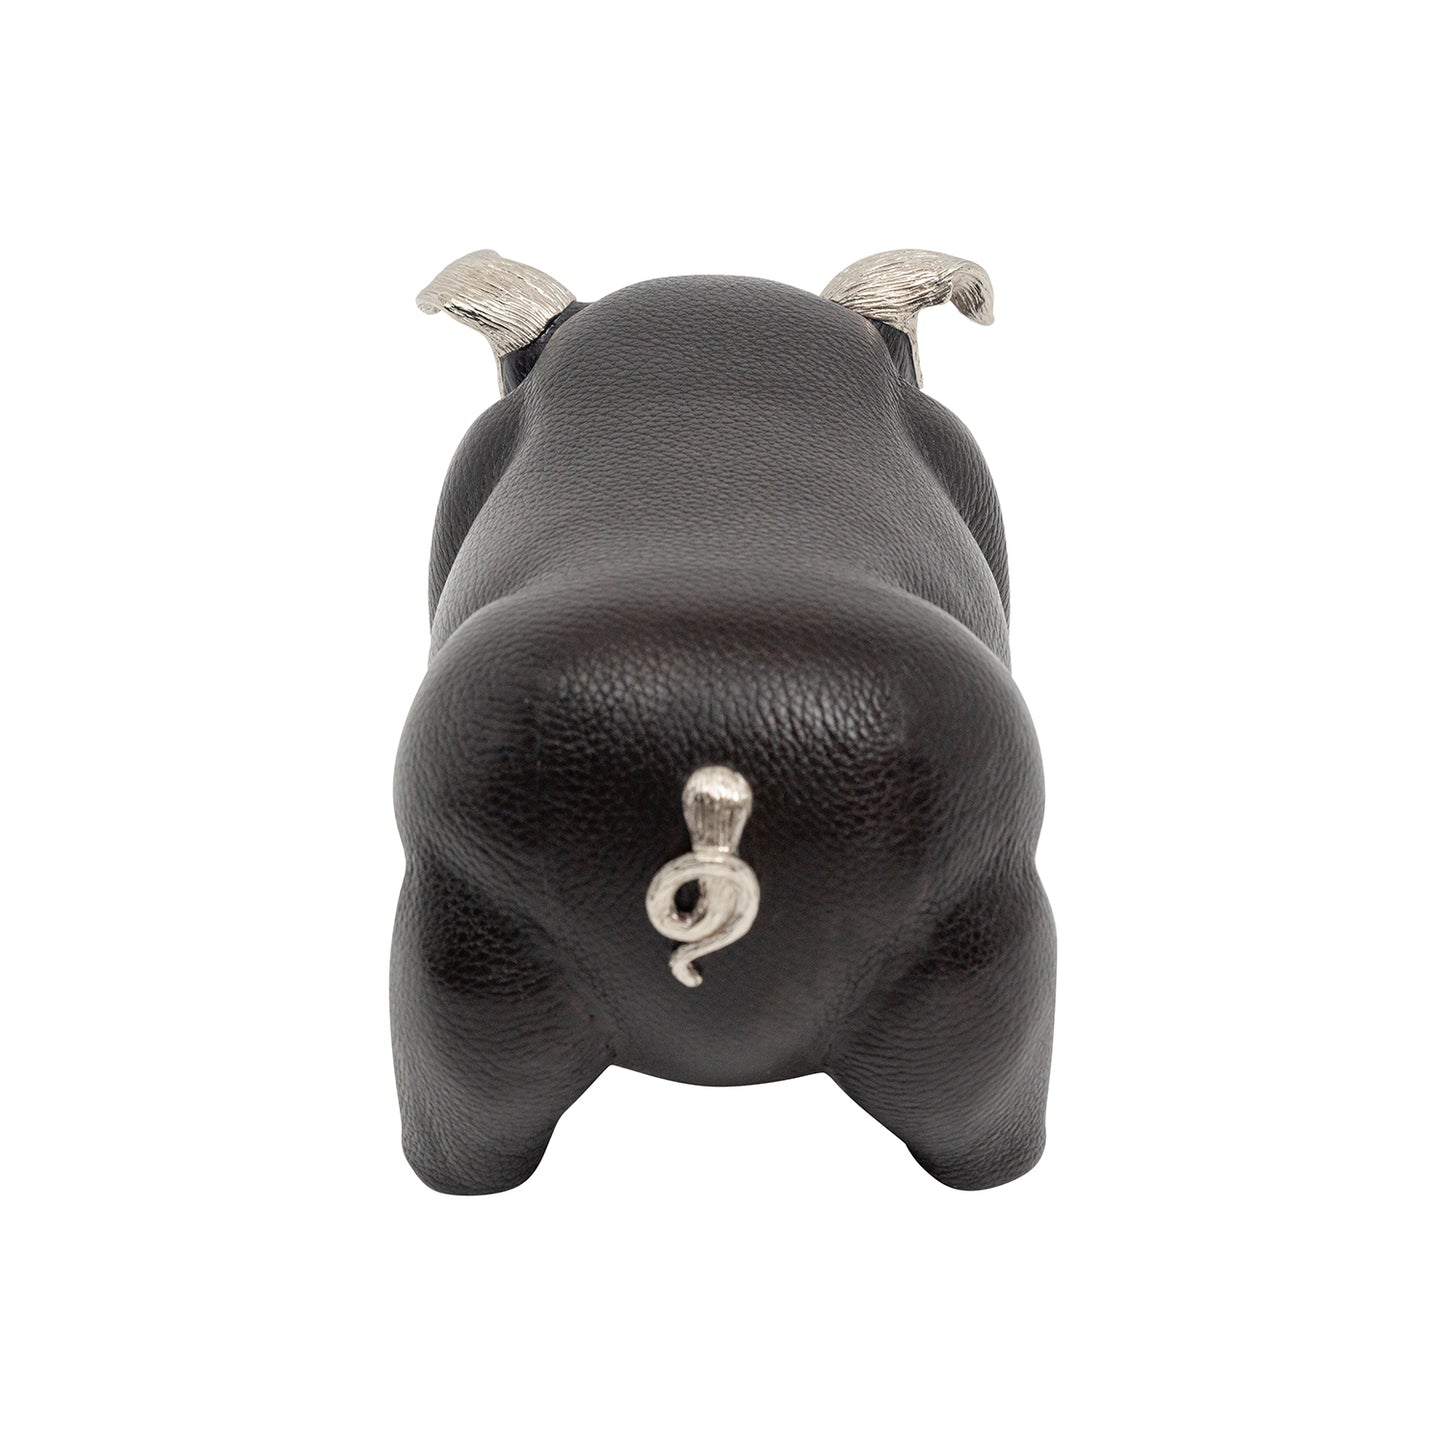 Brown Leather Pig Paperweight/Bookend